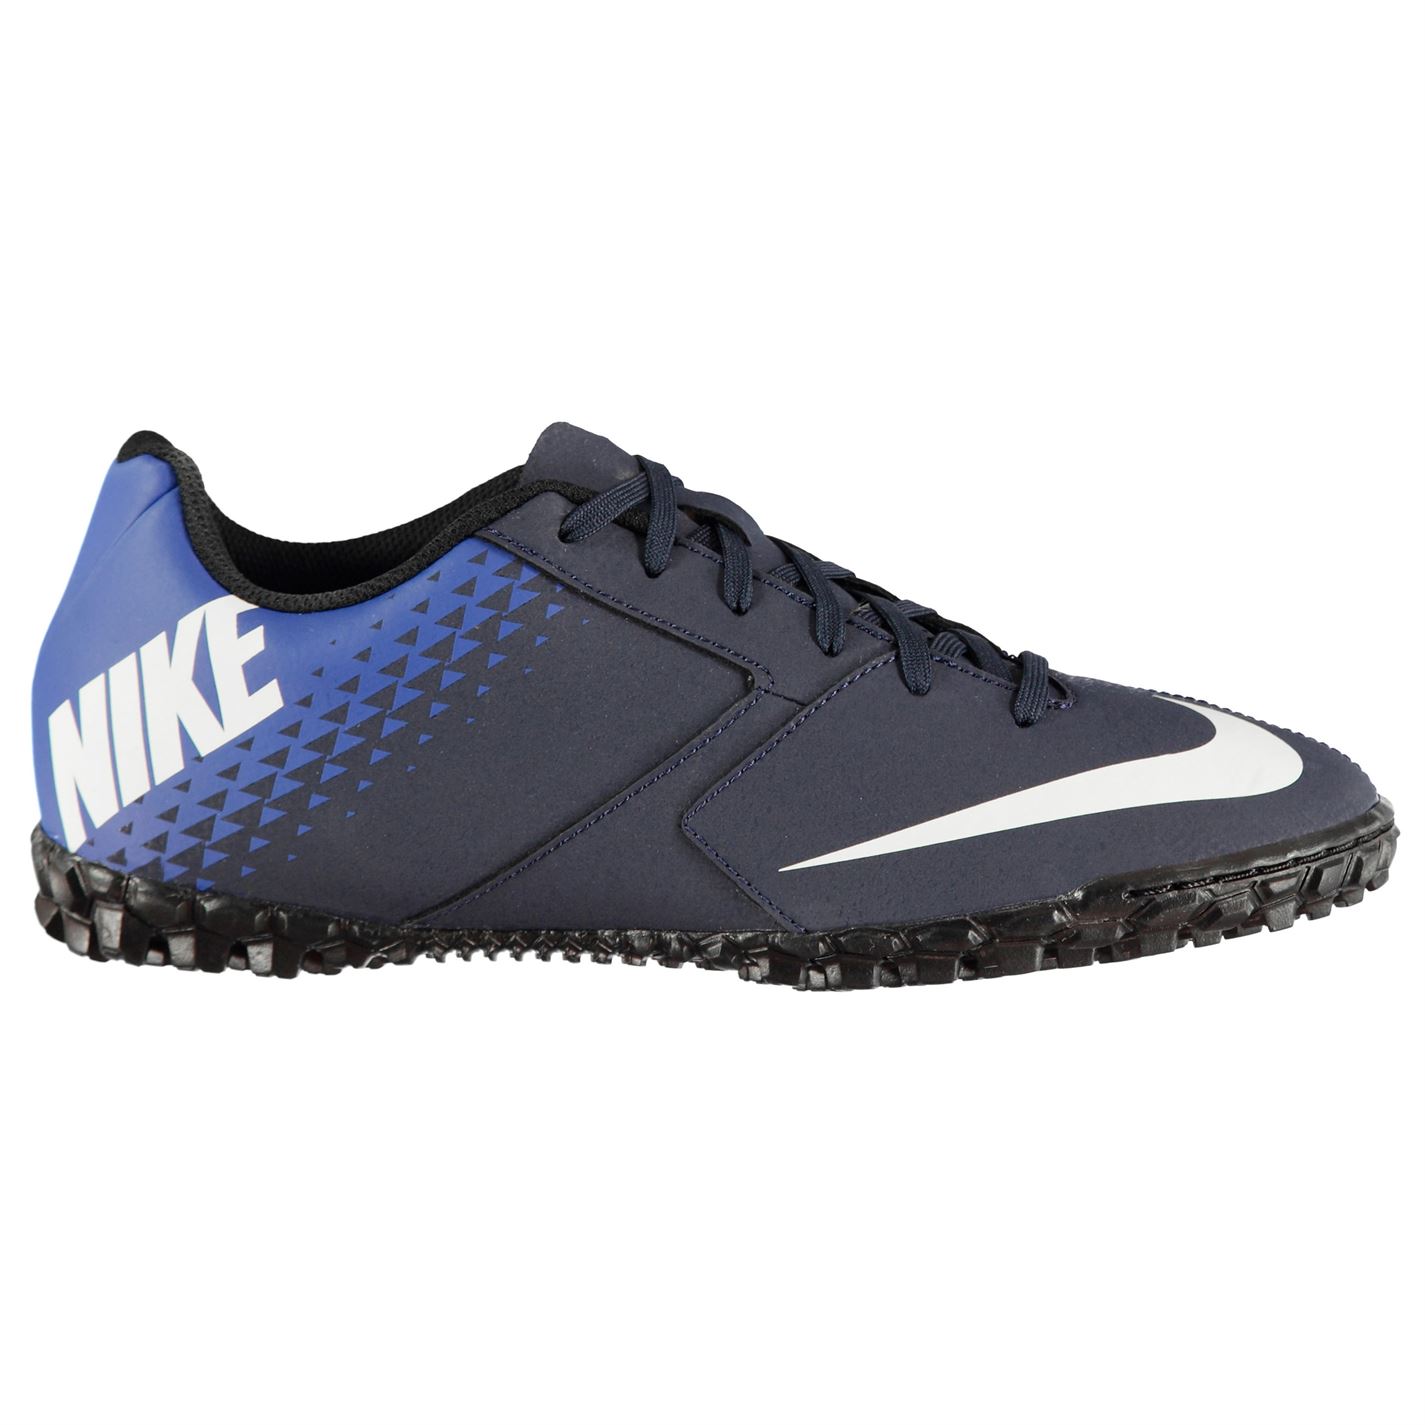 nike astro turf boots mens